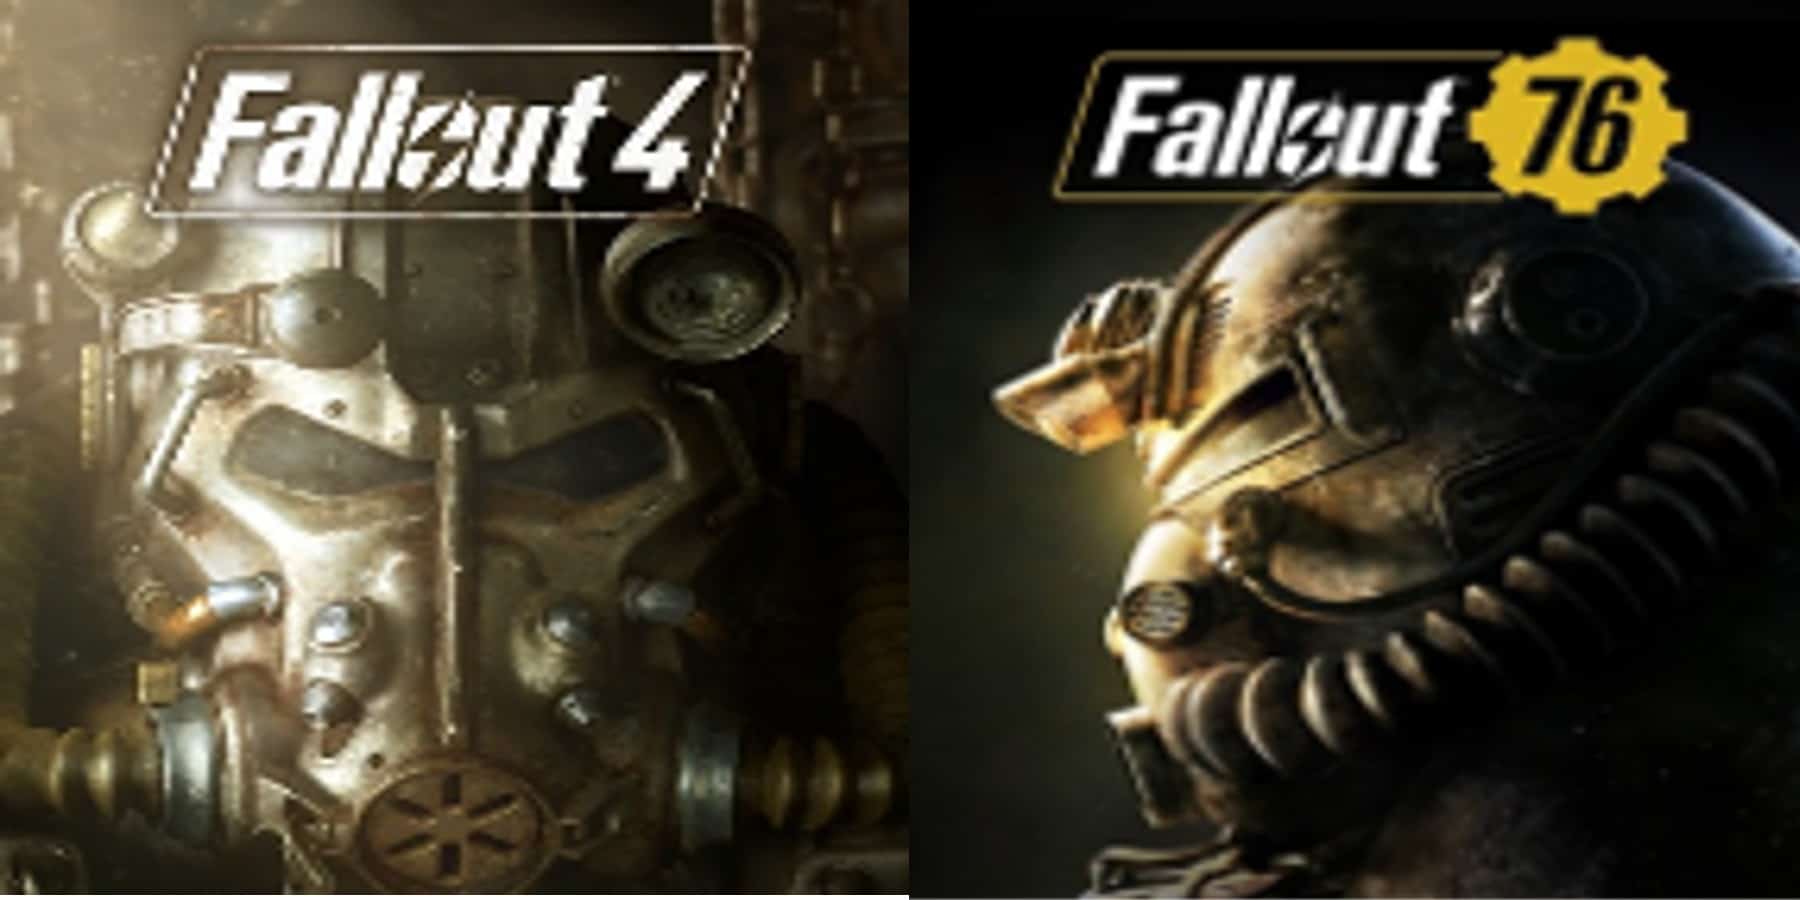 Fallout 4 vs Fallout 76: Which is Better For You? - Cheat Code Central